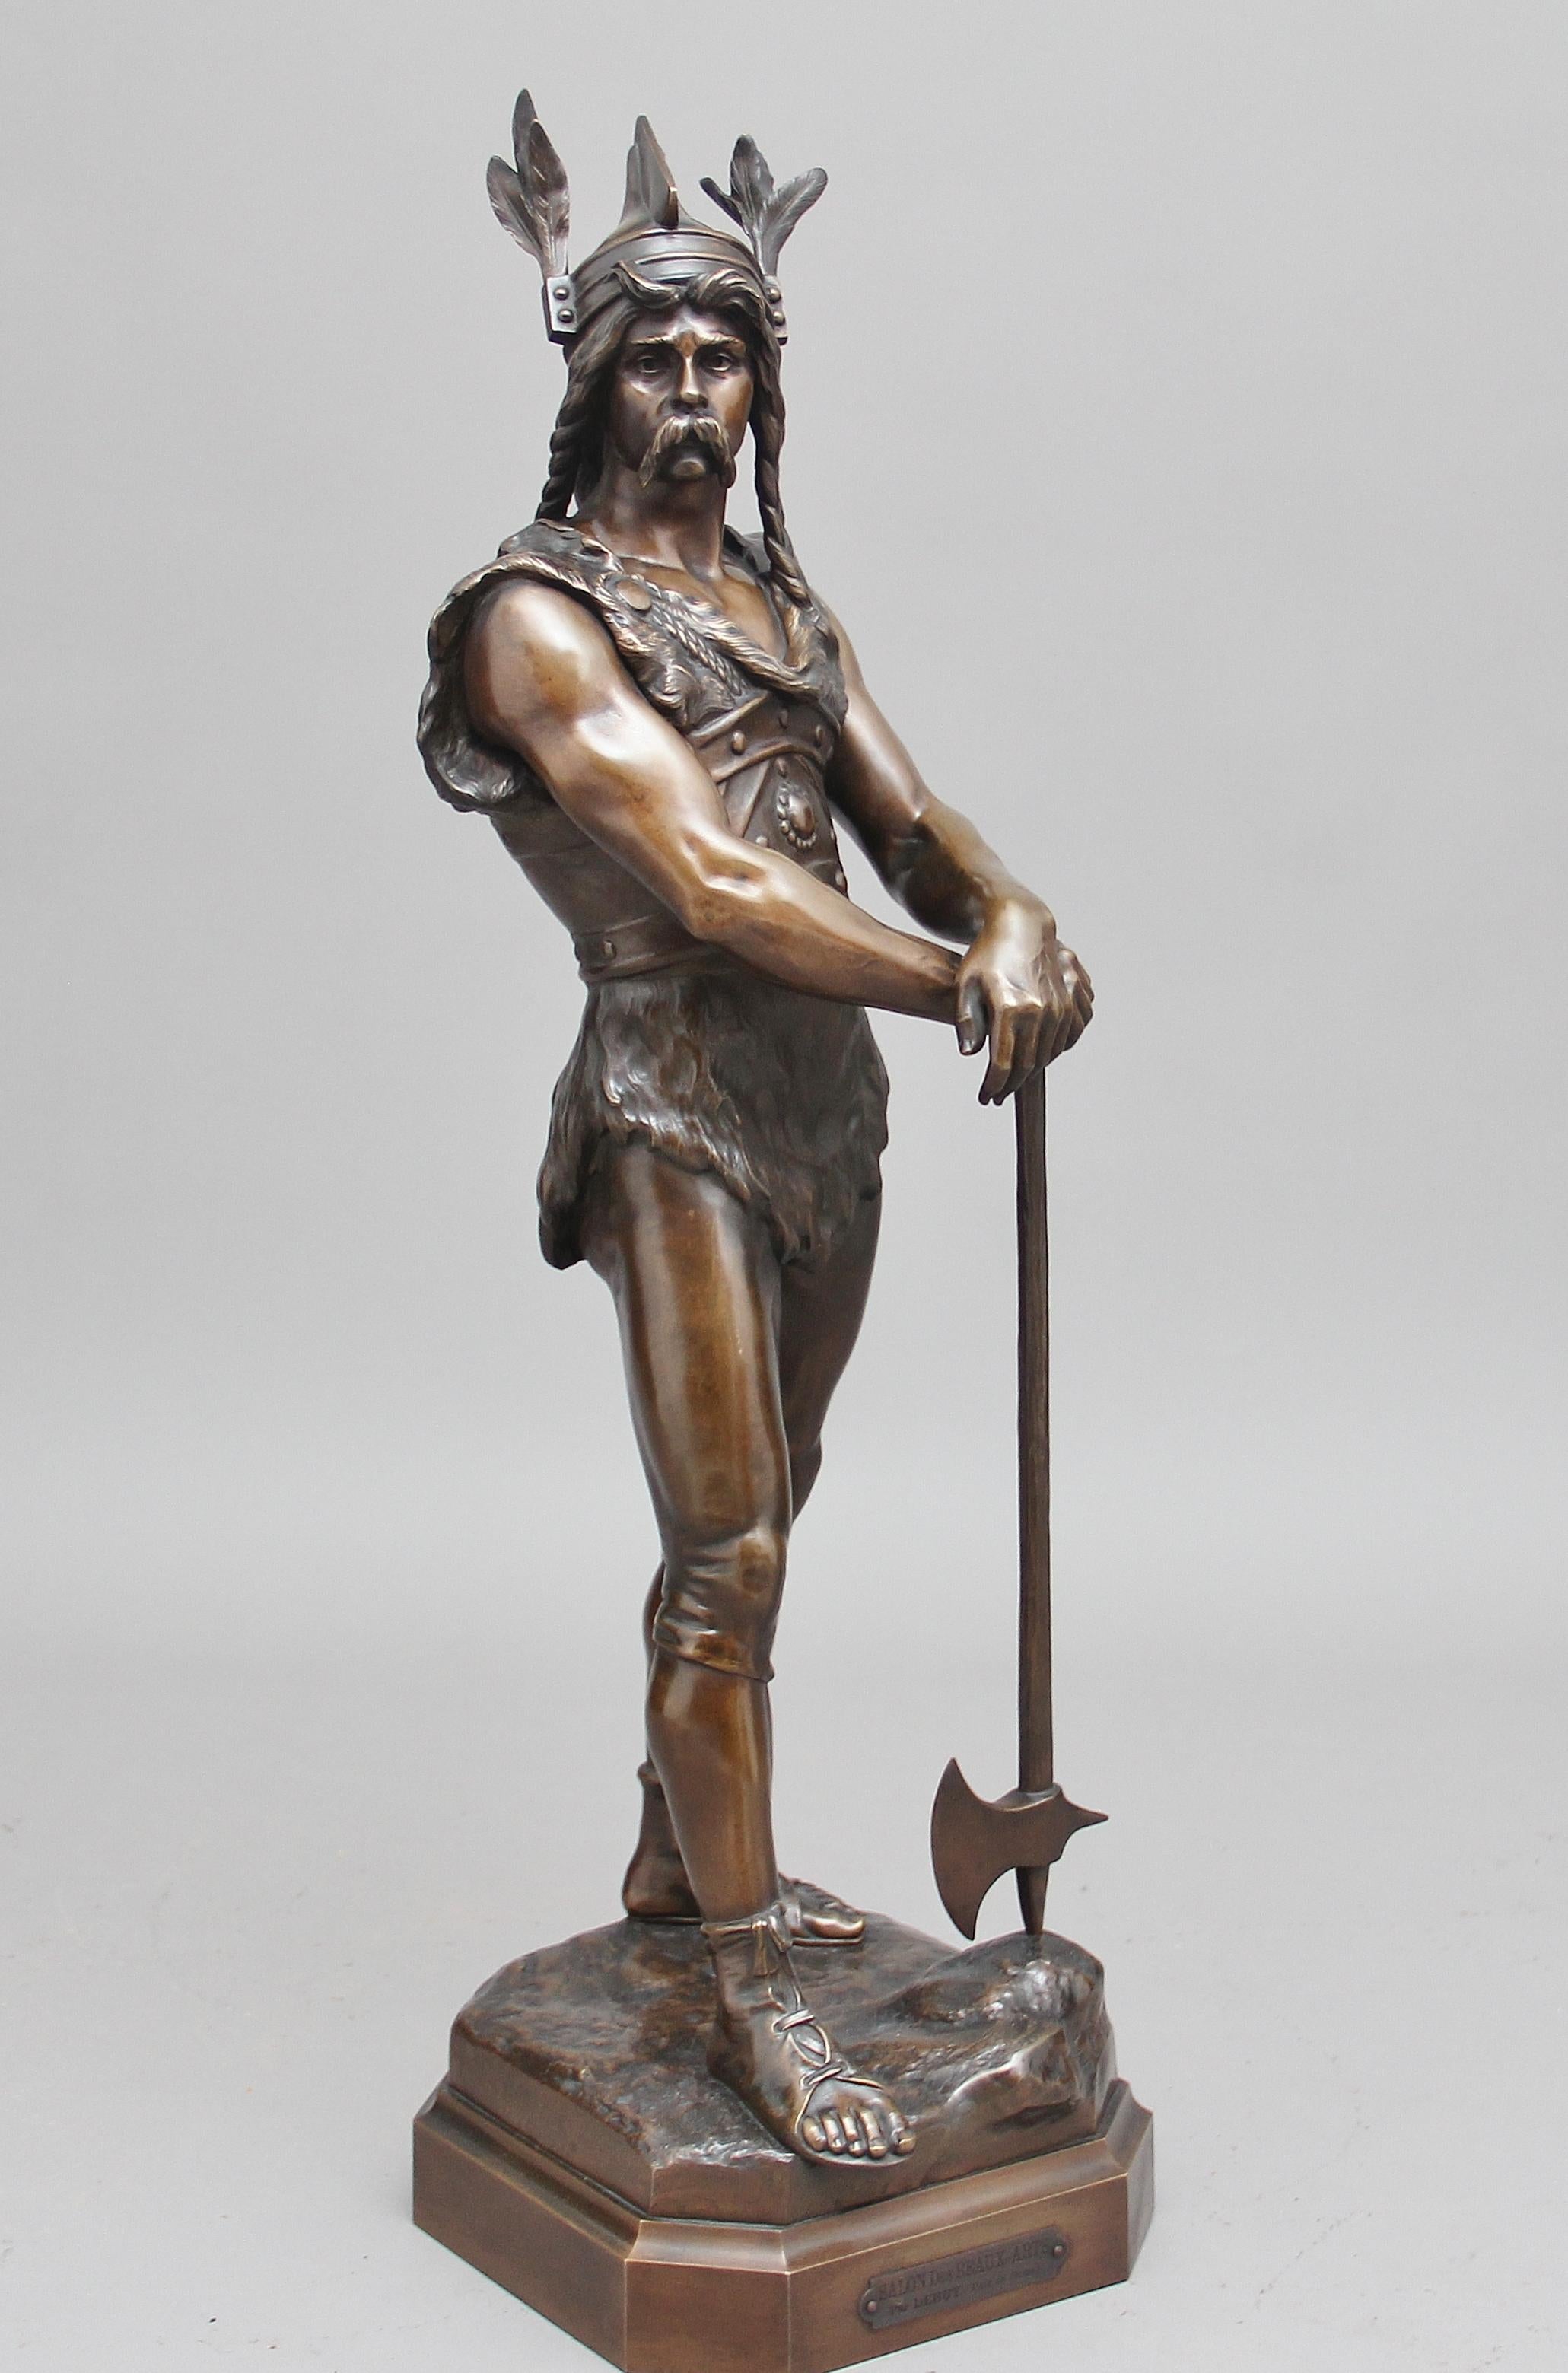 A fantastic quality bronze of Vercingetorix (the Gallic warlord who resisted Julius Caesar’s Roman advance) This large bronze has a fabulous patina, the base is signed “Debut” and on the lower base there’s a plaque marked SALON Des BEAUX- ARTS Par